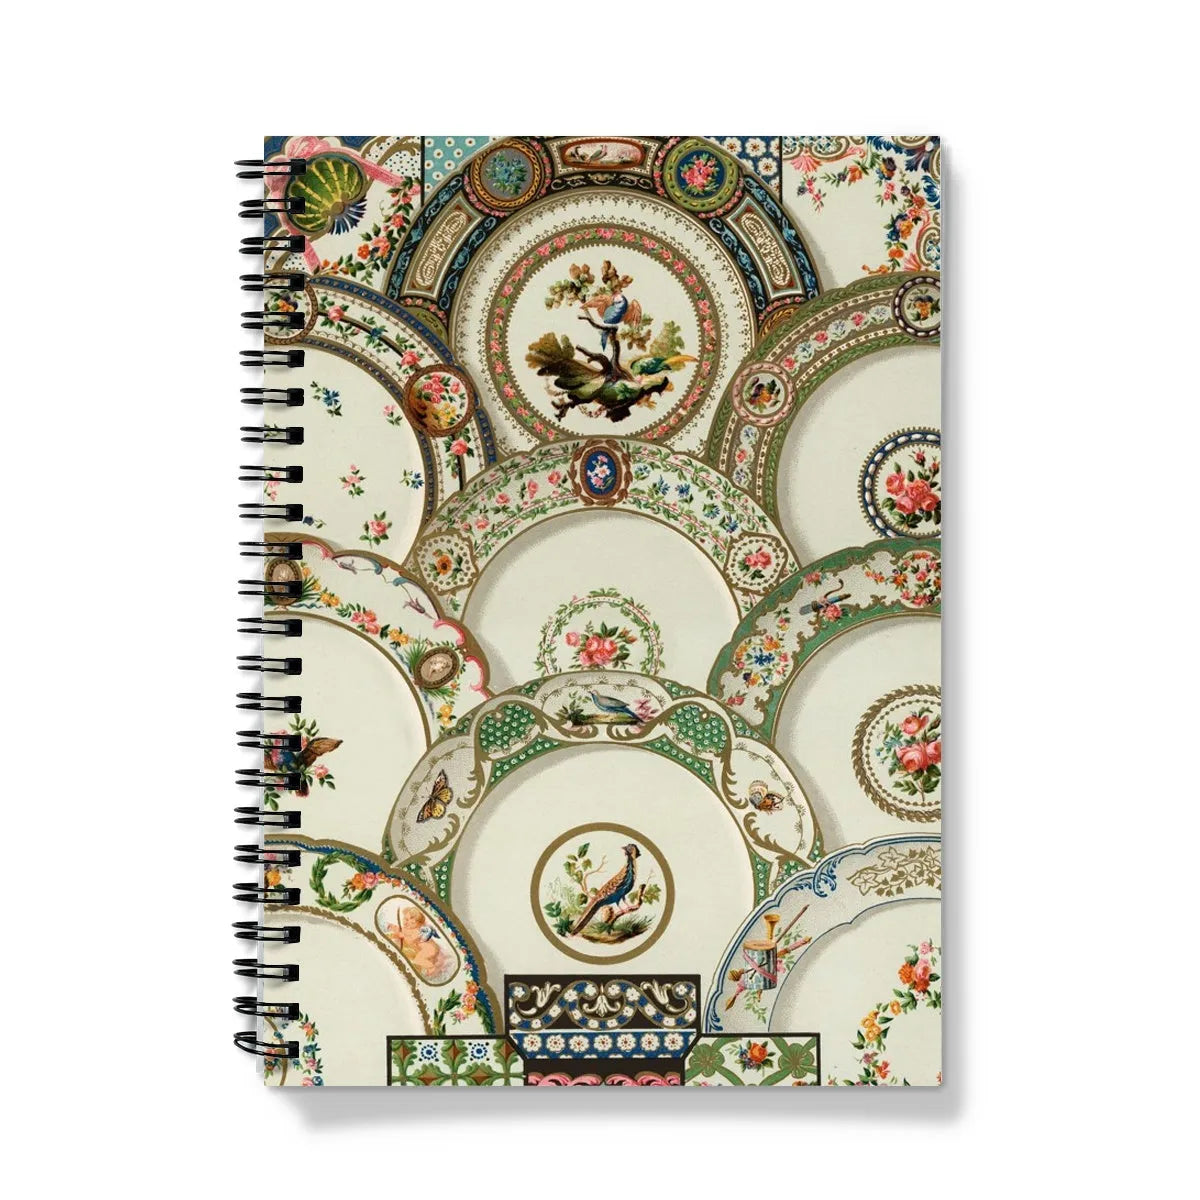 Decorative Plates By Auguste Racinet Notebook - A5 / Graph - Notebooks & Notepads - Aesthetic Art